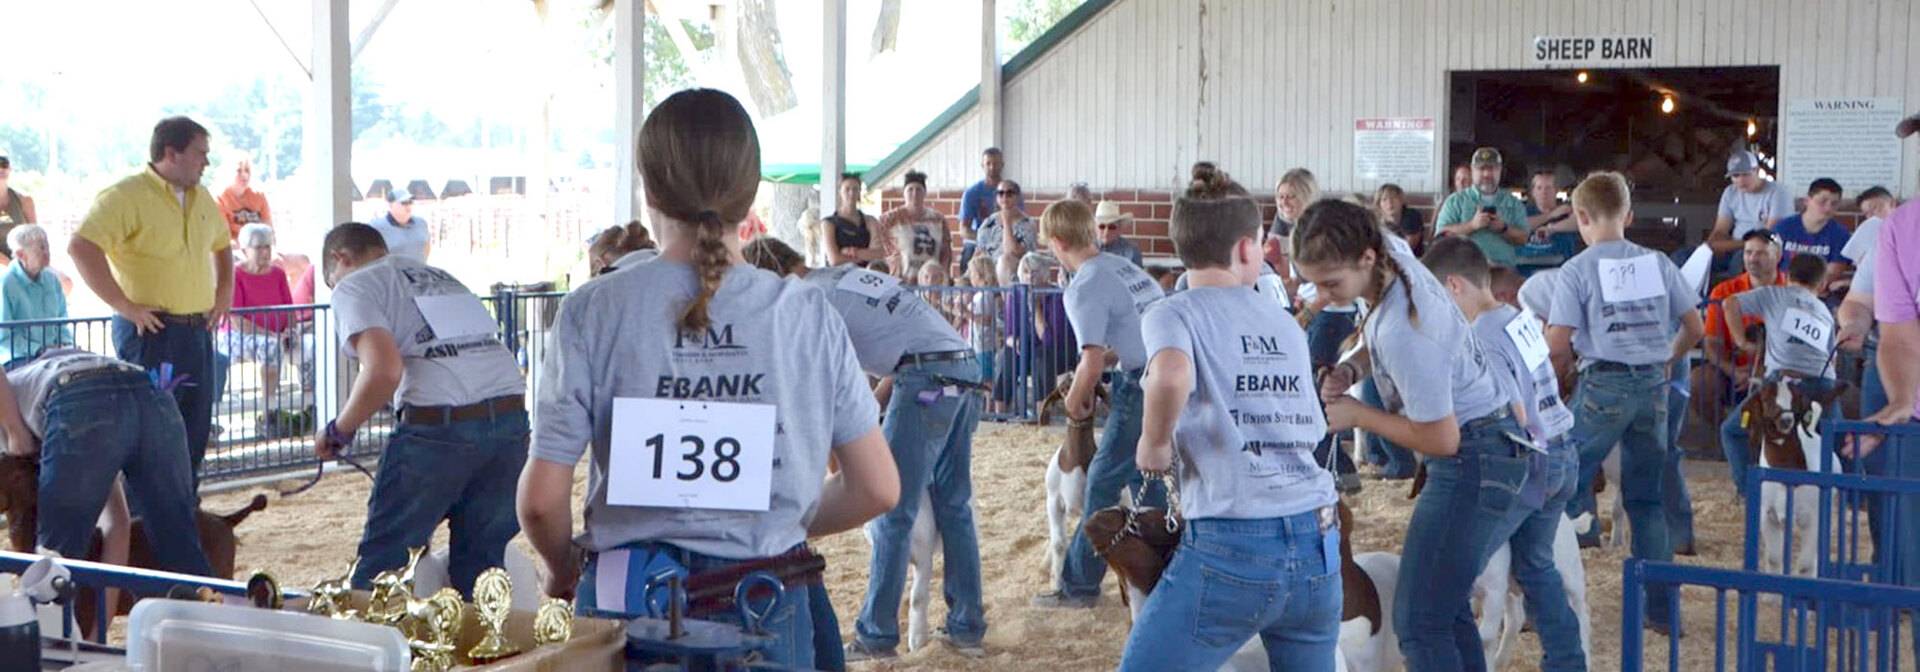 Mutliple young people in gray t-shirts showing sheep at the Madison County Fair